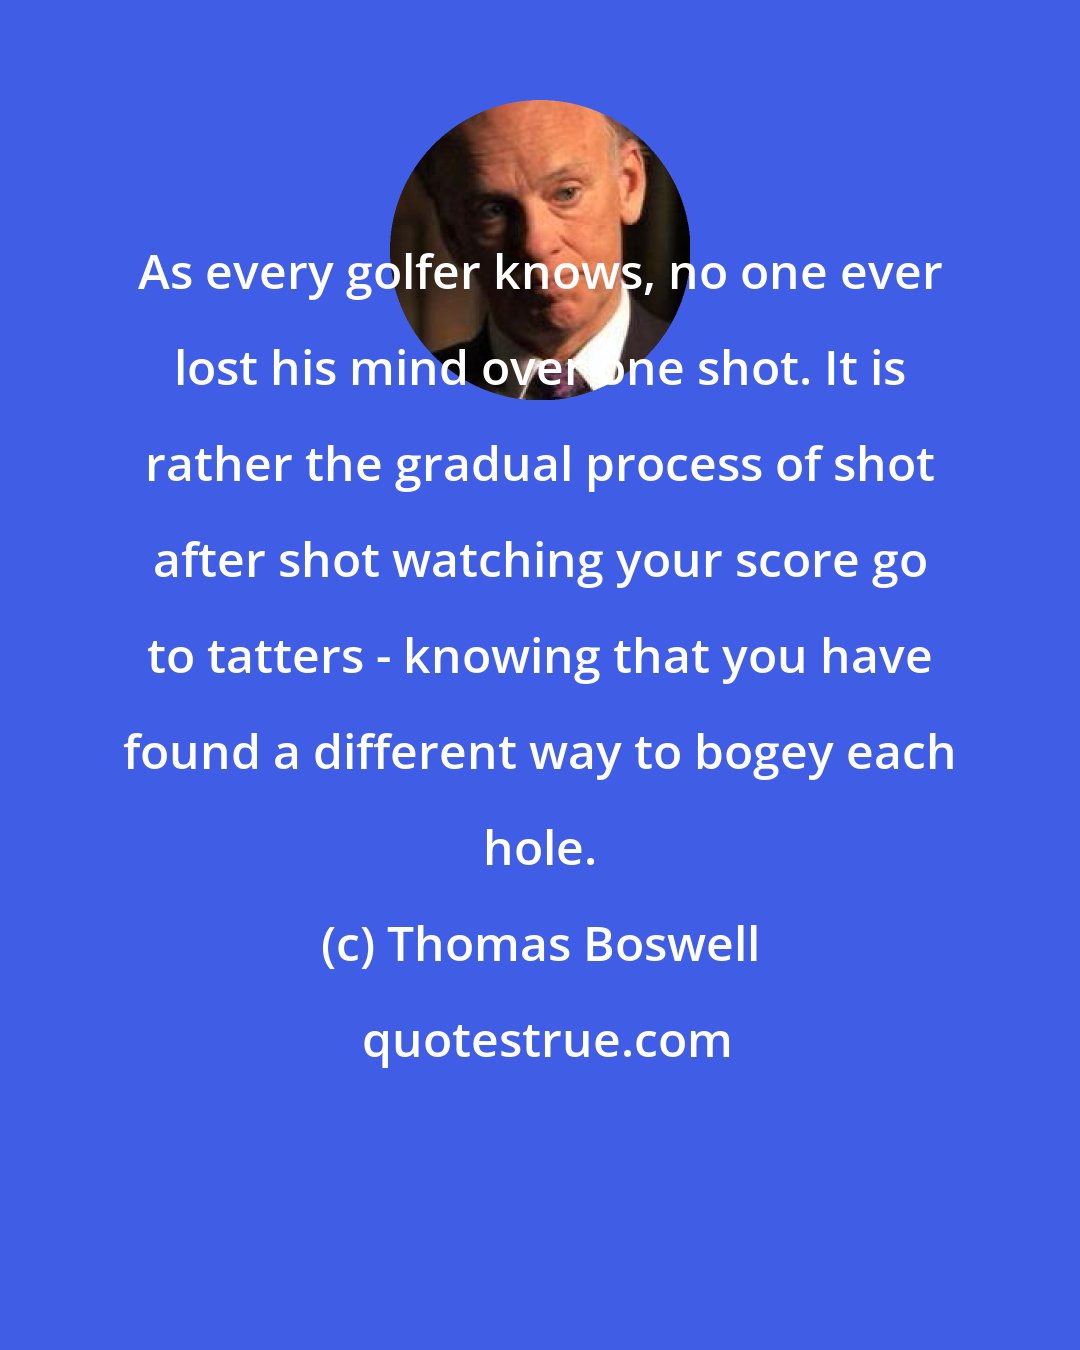 Thomas Boswell: As every golfer knows, no one ever lost his mind over one shot. It is rather the gradual process of shot after shot watching your score go to tatters - knowing that you have found a different way to bogey each hole.